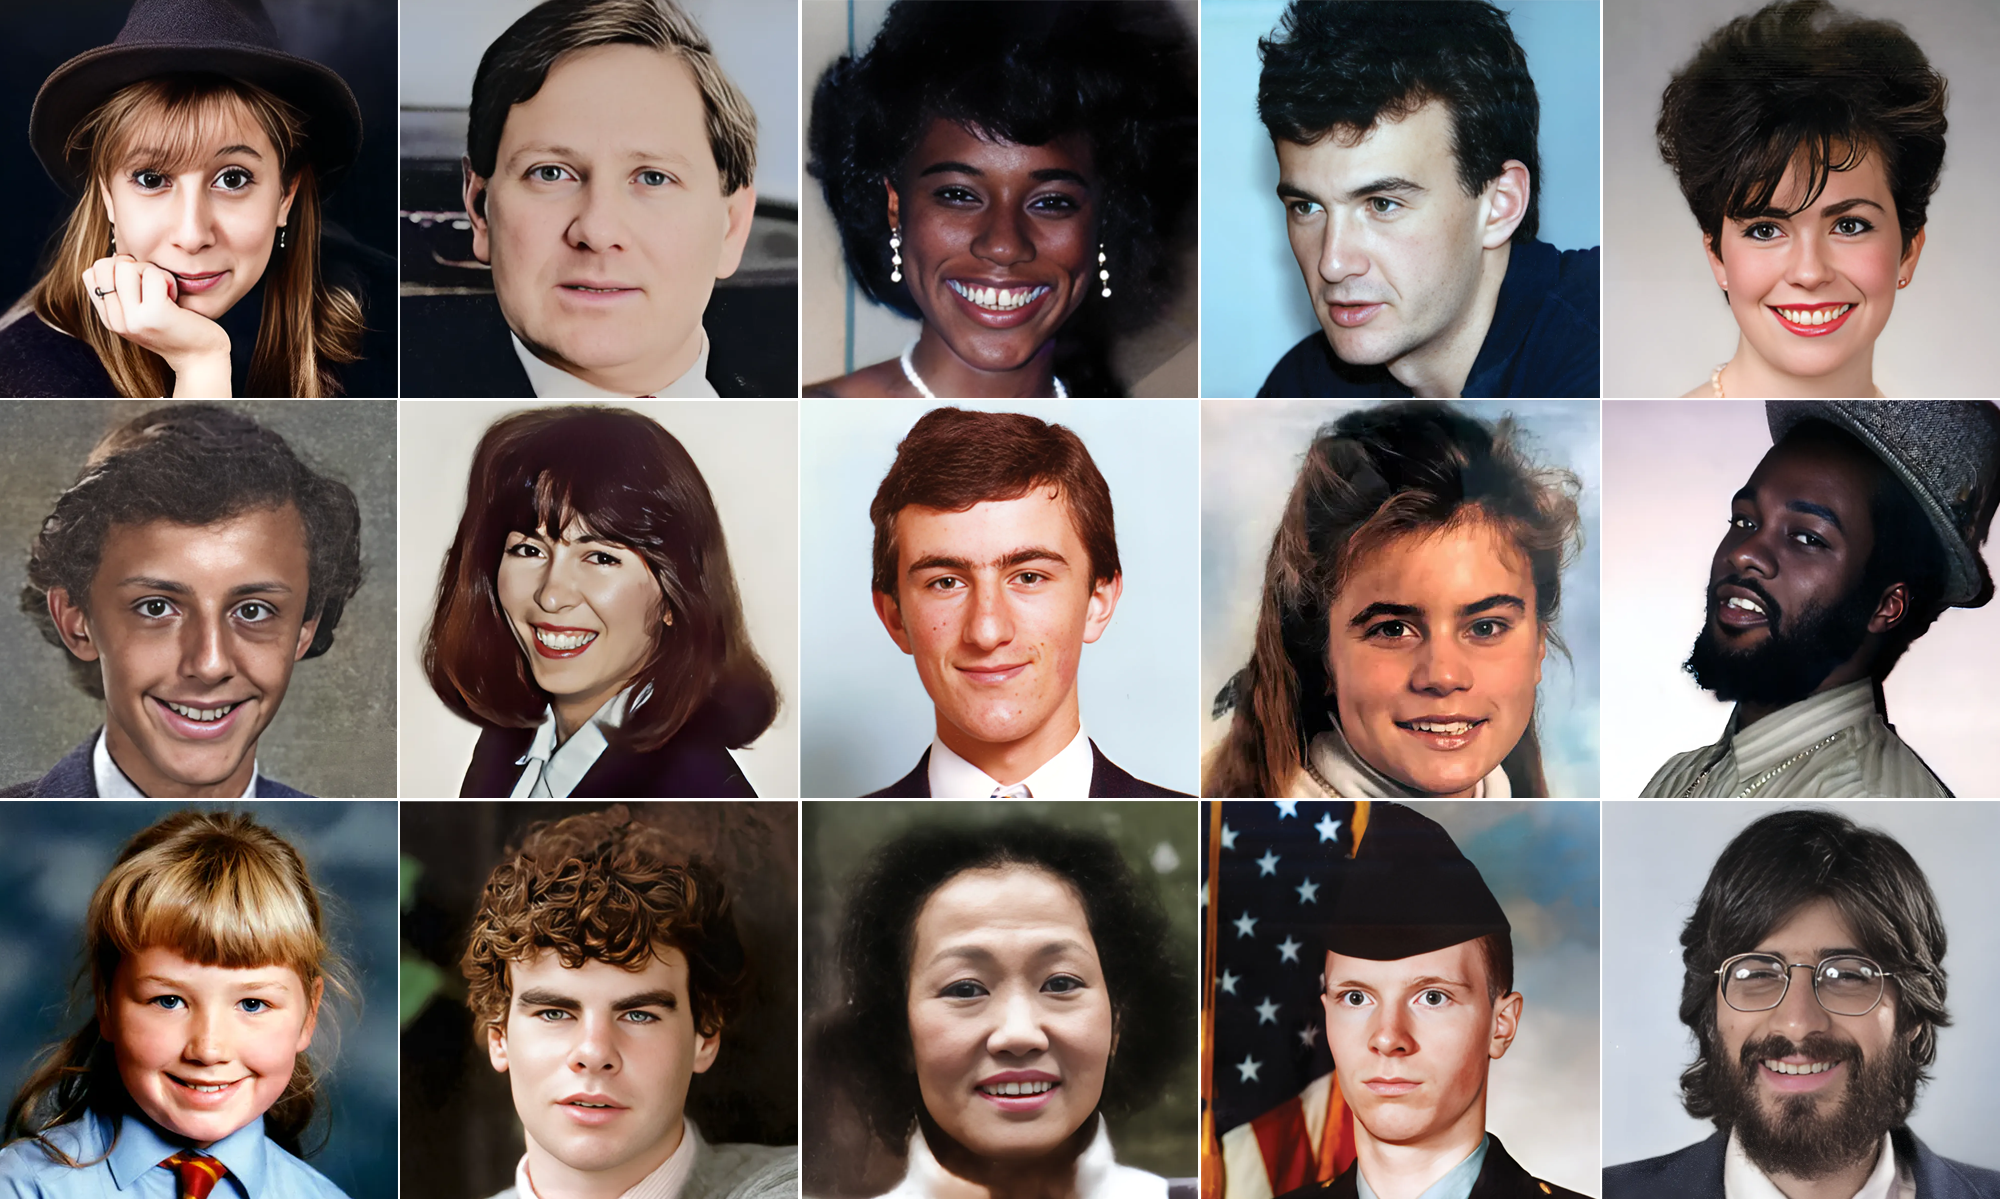 Faces of Bombing of Pan Am 103 Victims